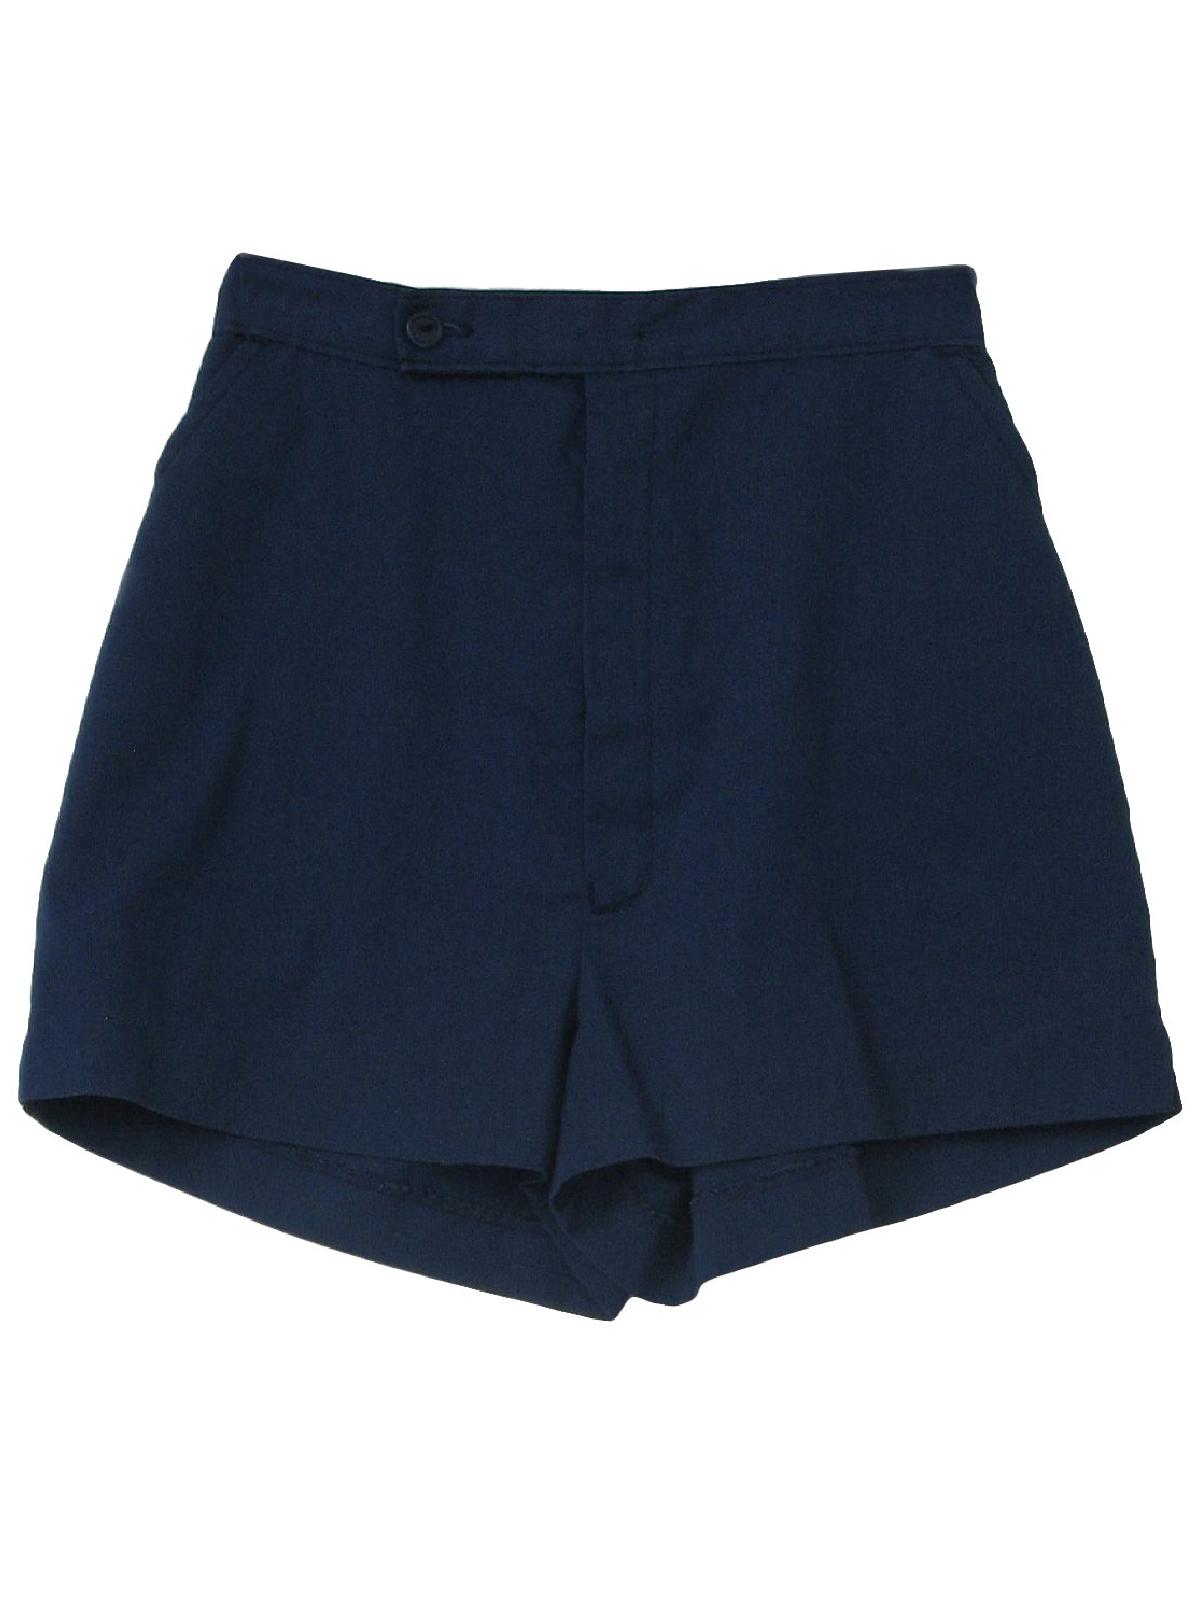 1970's Shorts (Care Label): 70s -Care Label- Womens navy blue polyester ...